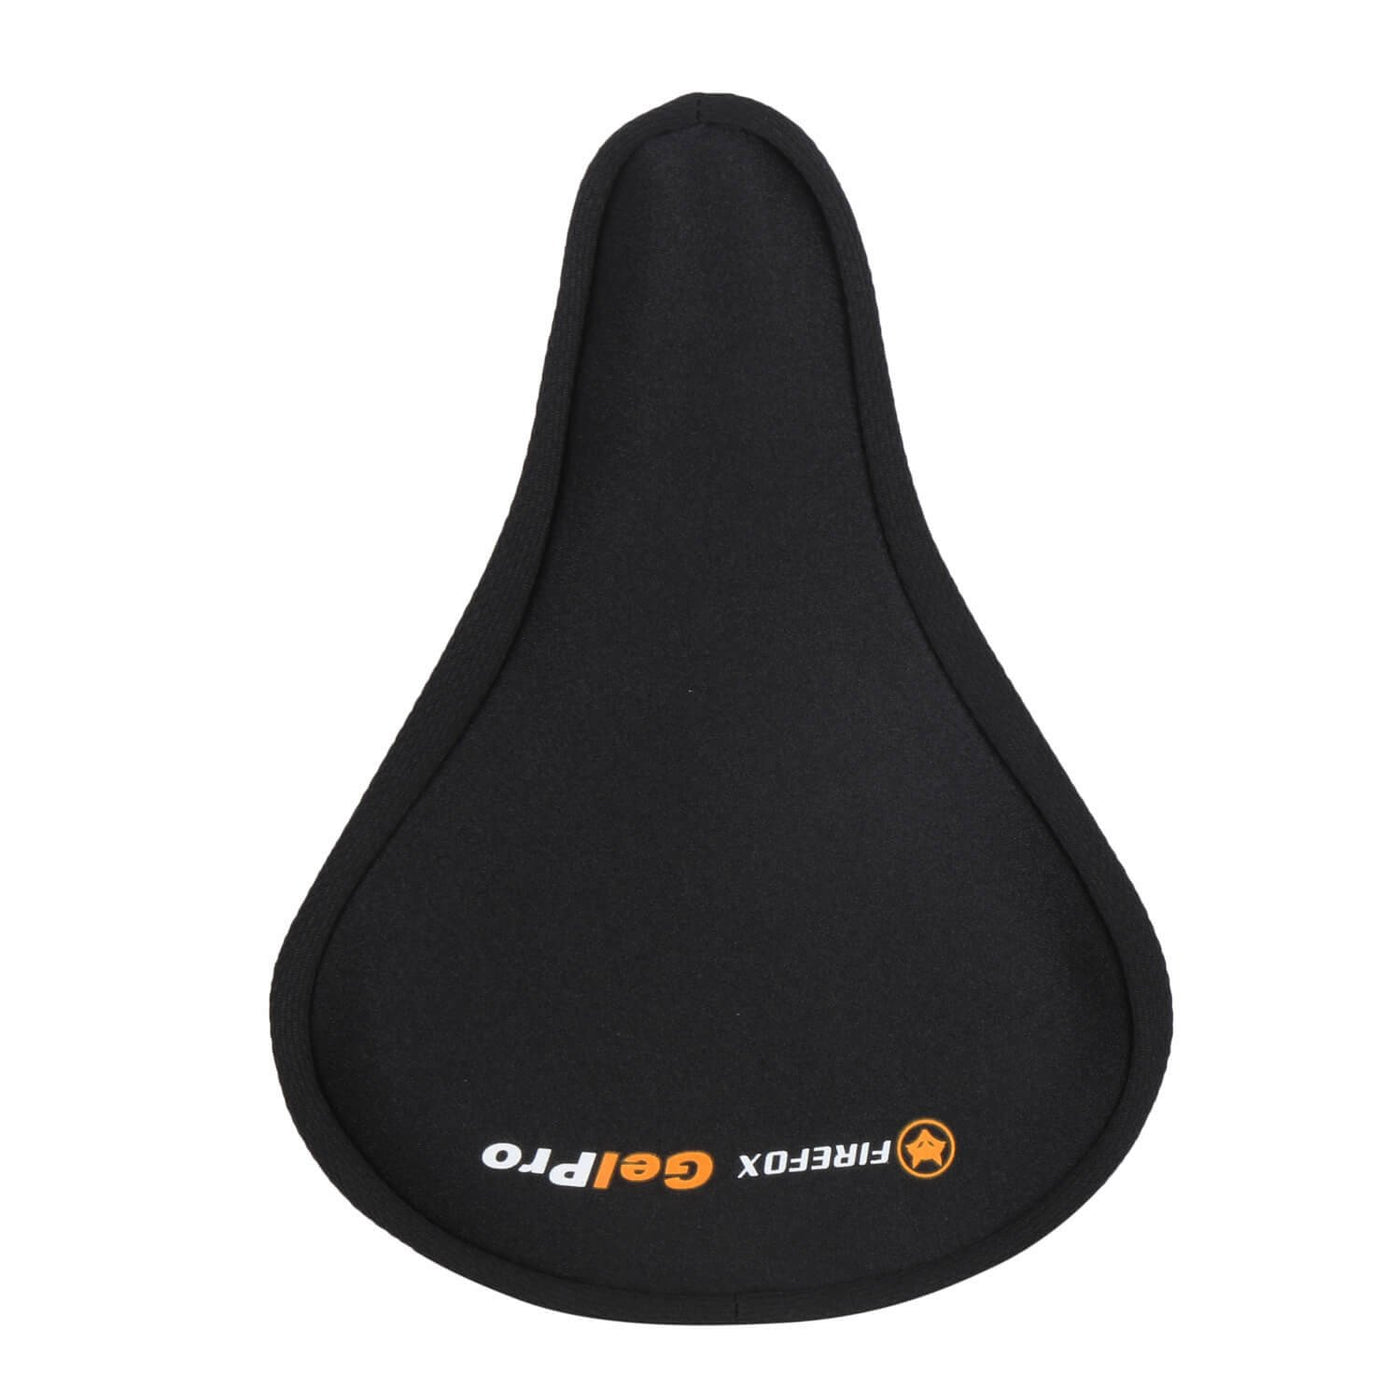 Firefox Bicycle Saddle Cover - Velo (Kids) - Cyclop.in